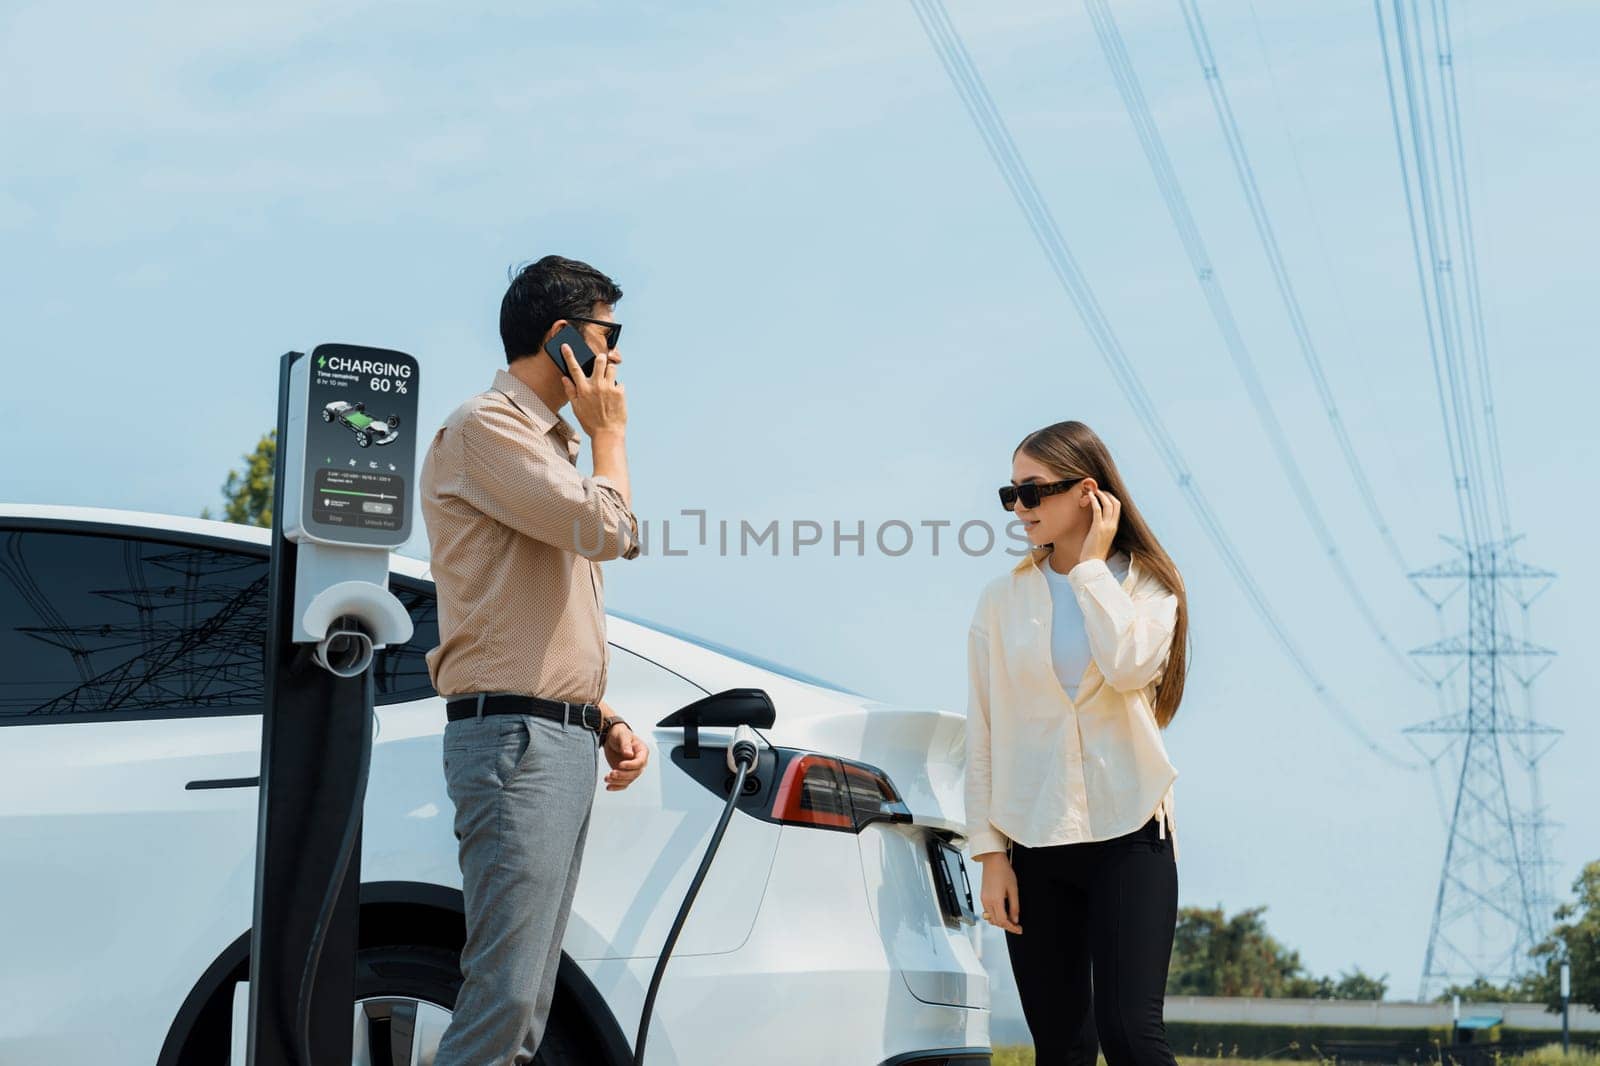 Couple pay for electricity with smartphone while recharge EV car battery at charging station connected to power grid tower electrical as electrical industry for eco friendly car utilization.Expedient